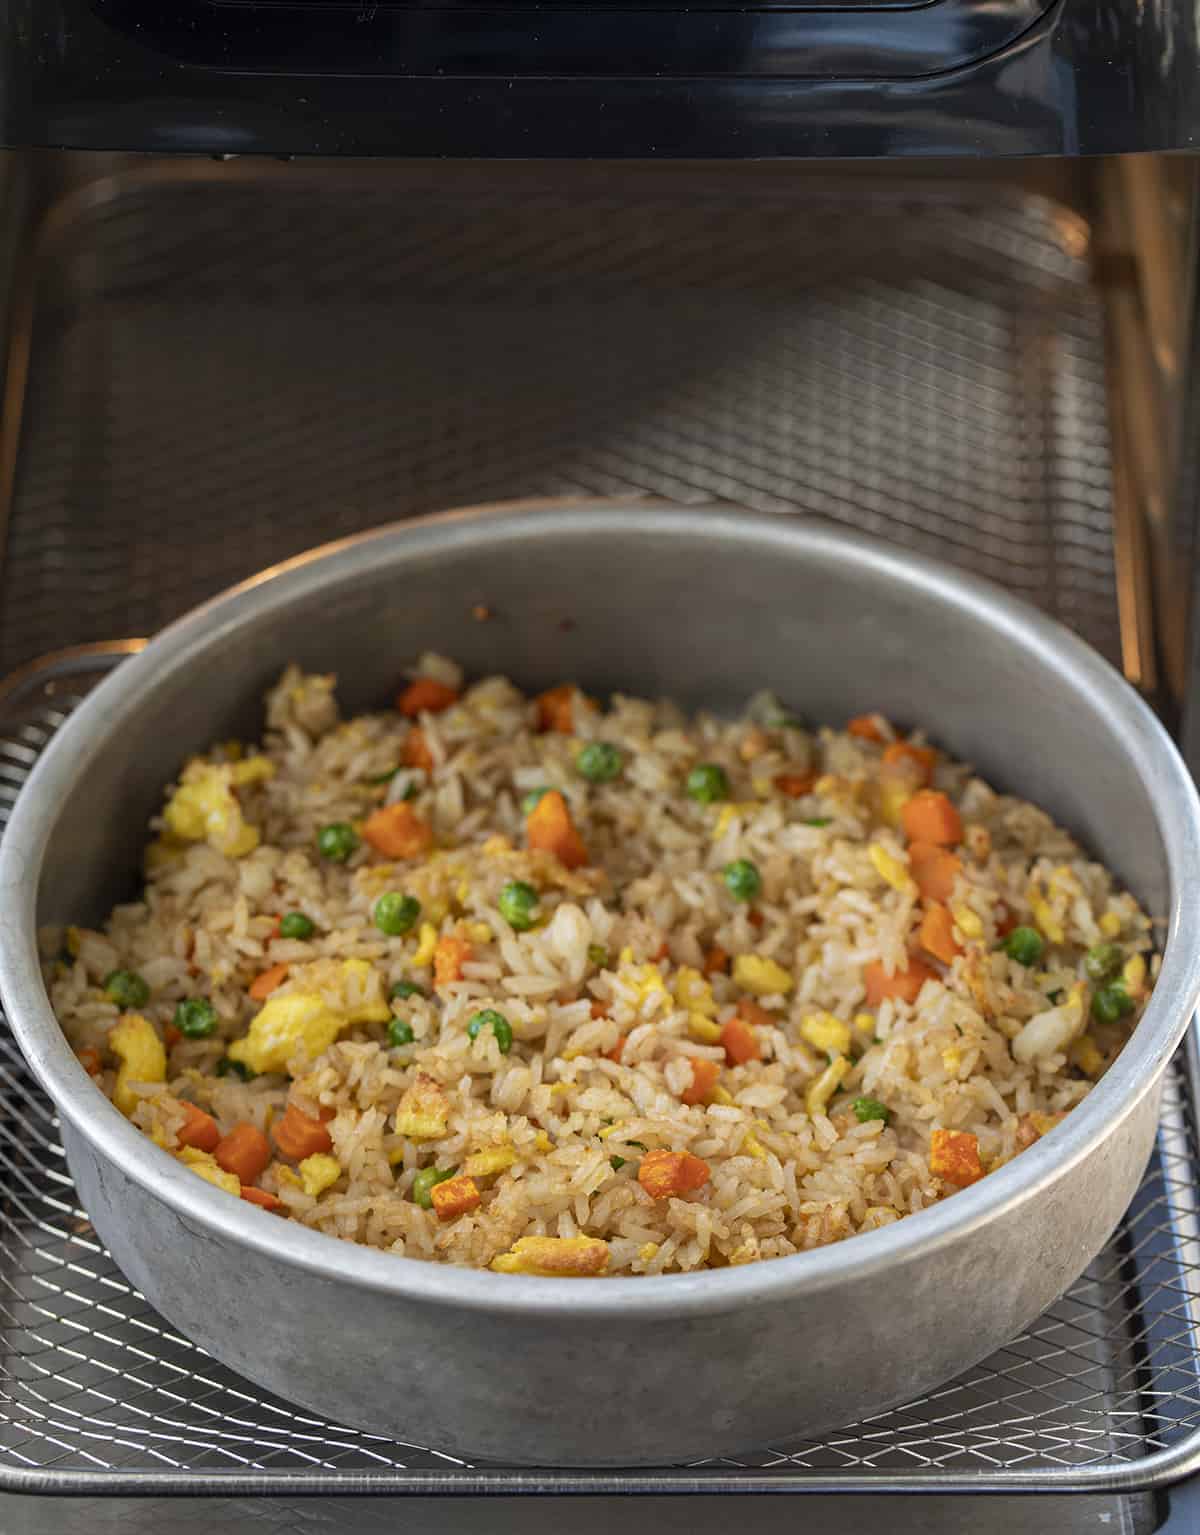 Pan with Fried Rice in it Being Made in an Air Fryer